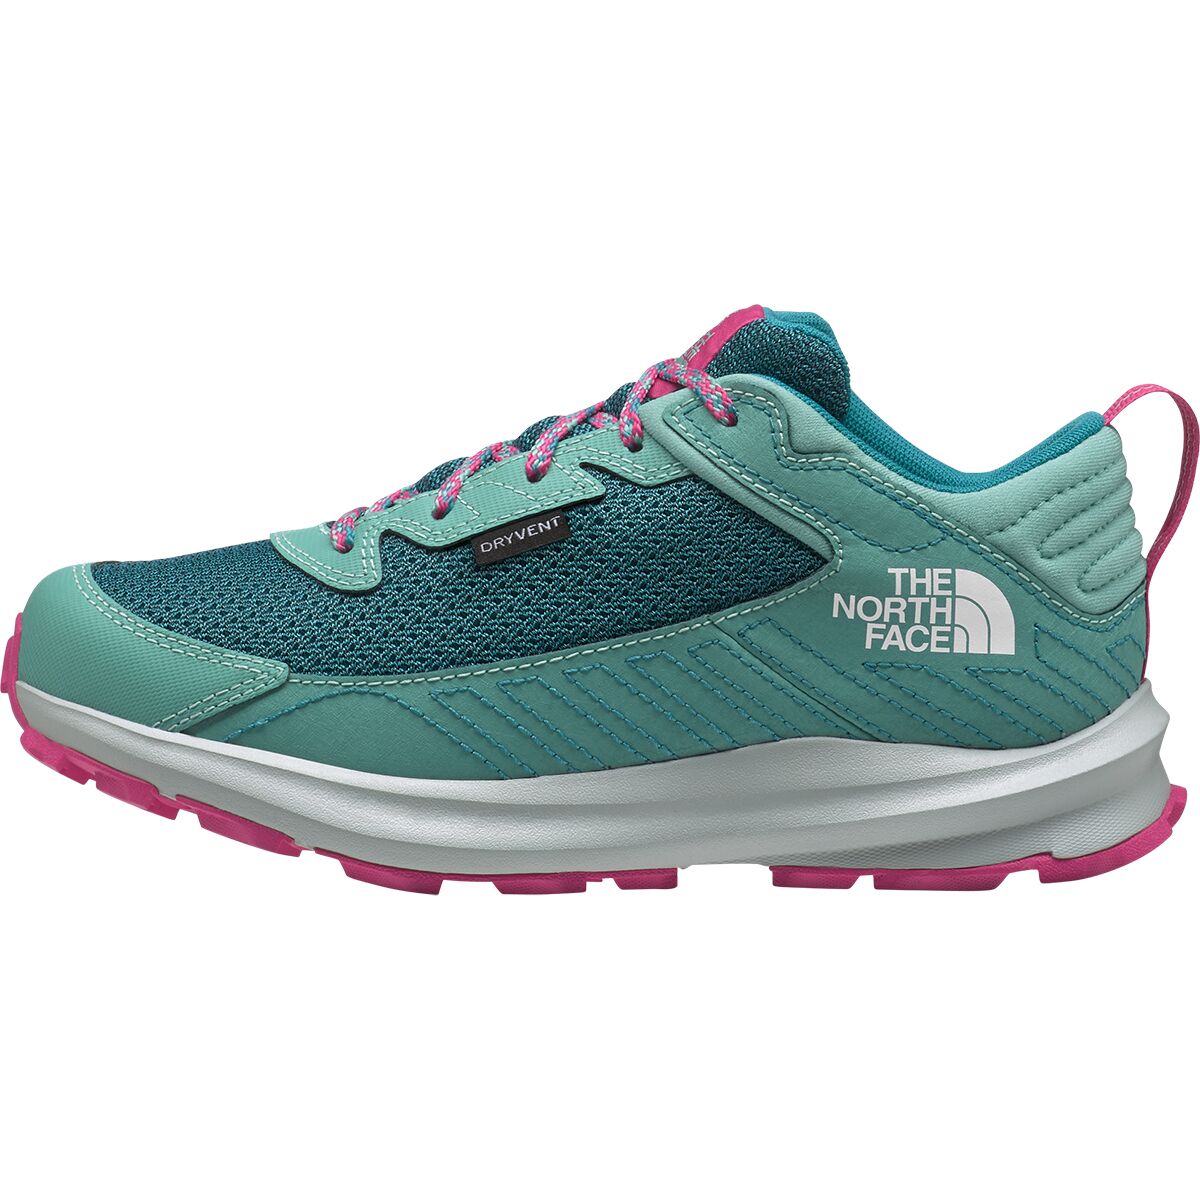 The North Face Fastpack Waterproof Hiking Shoe - Kids'